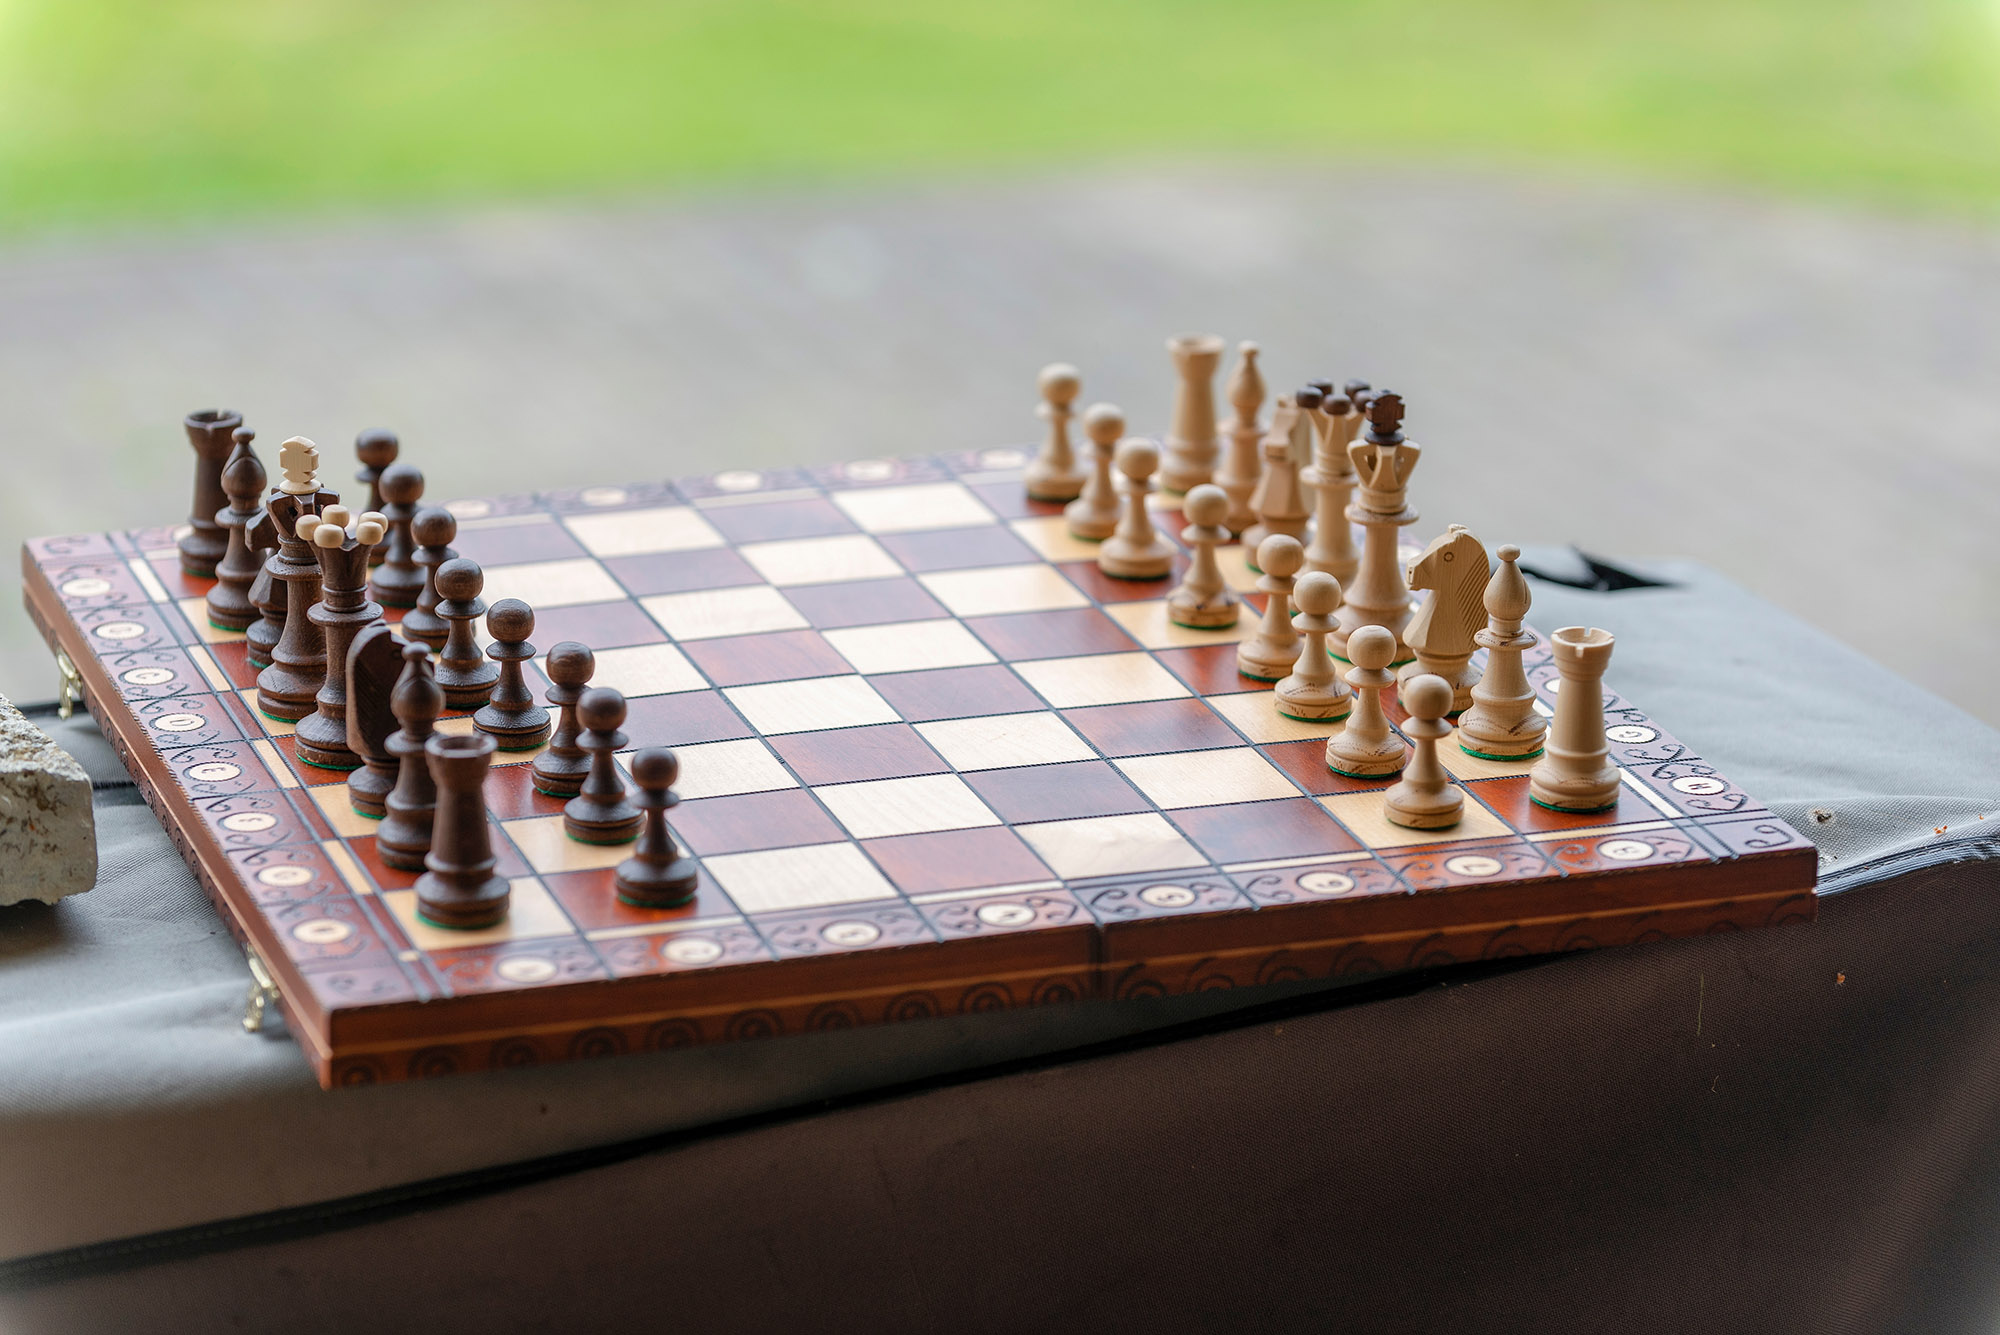 Chapter 5: The Rules of Chess: Getting Started With Your First Game